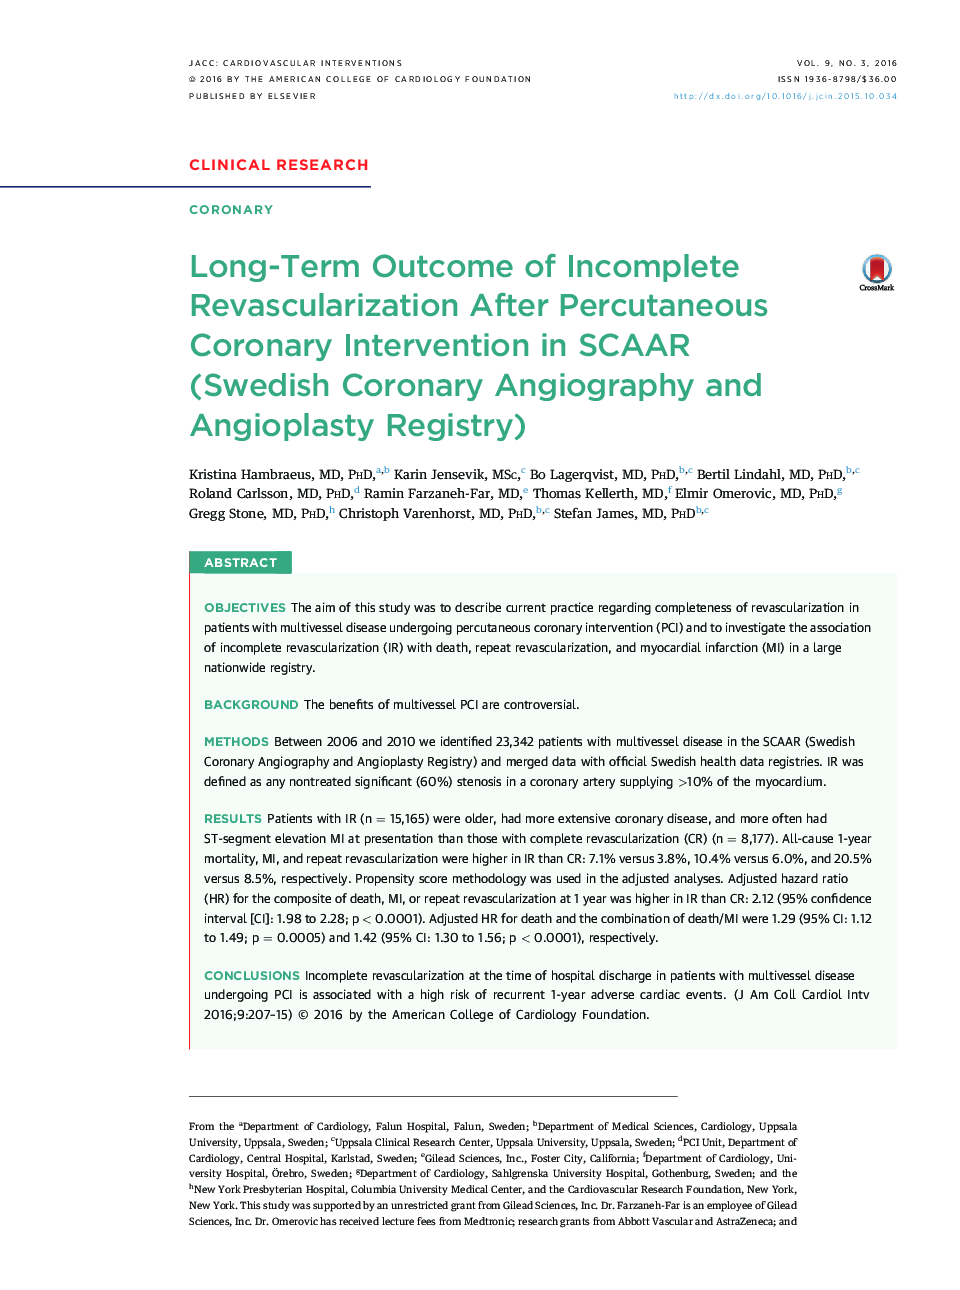 Long-Term Outcome of Incomplete Revascularization After Percutaneous Coronary Intervention in SCAAR (Swedish Coronary Angiography and Angioplasty Registry)